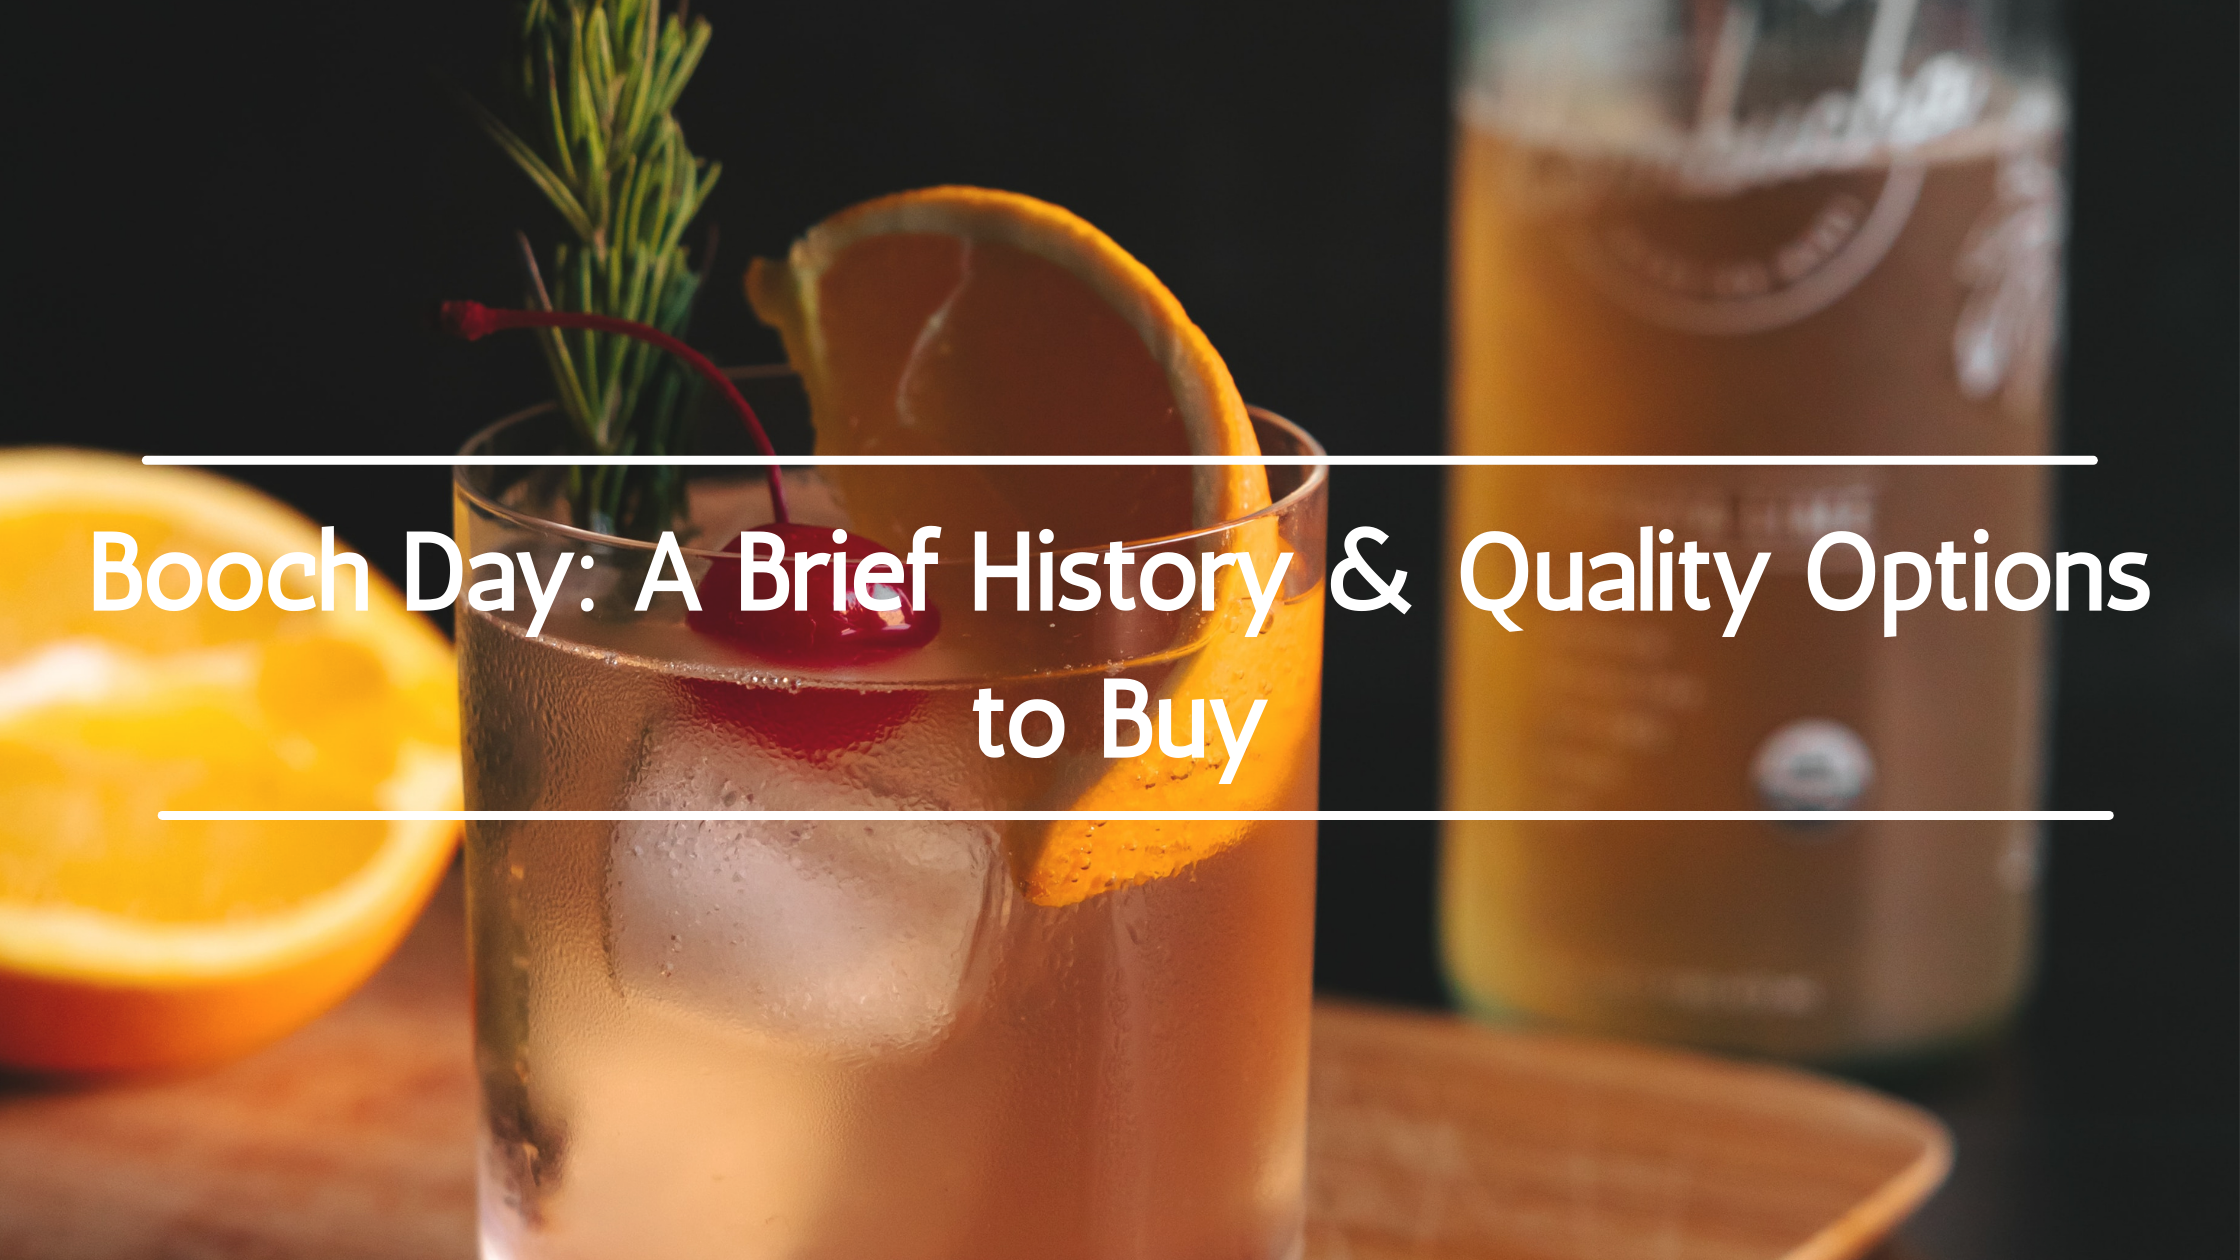 Booch Day: A Brief History & Quality Options to Buy